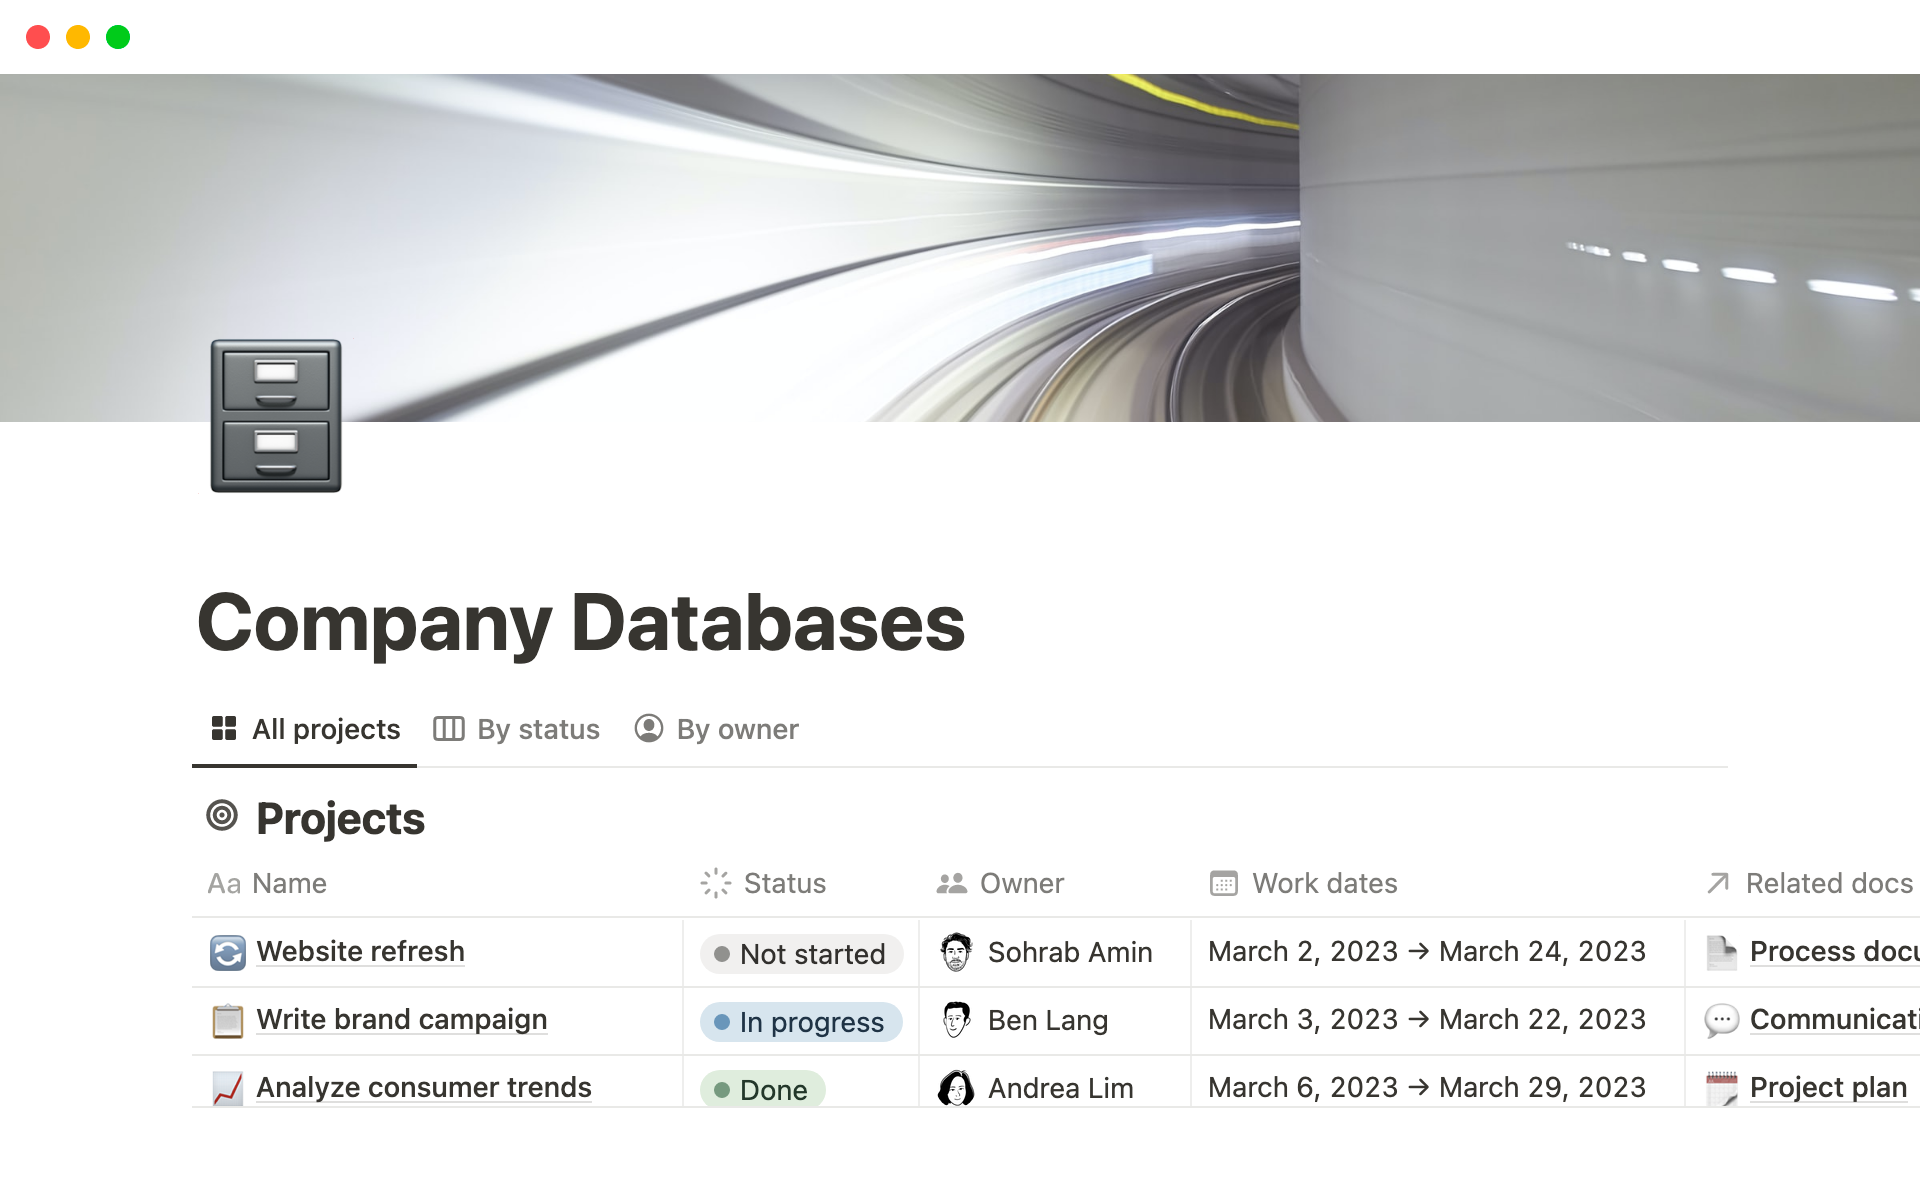 Organize your data and keep track of everything related to your business